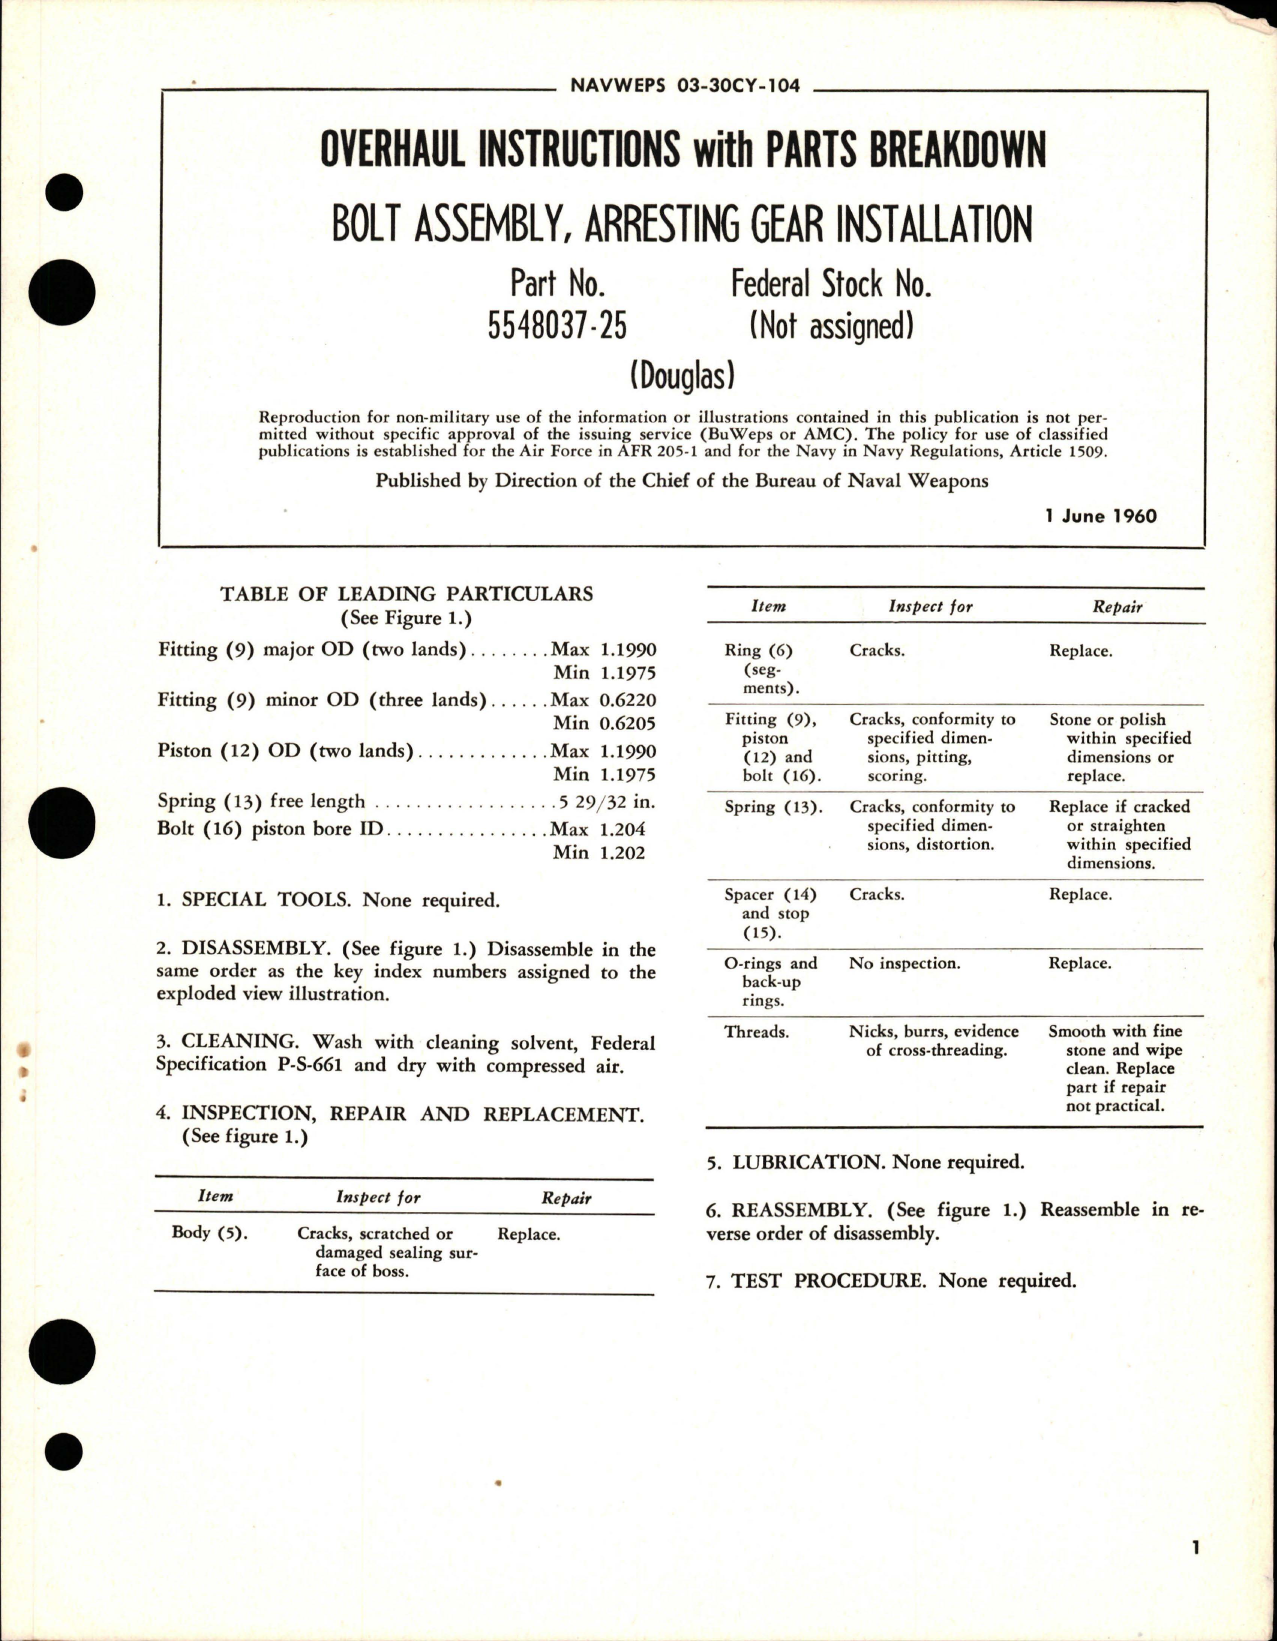 Sample page 1 from AirCorps Library document: Overhaul Instructions with Parts for Arresting Gear Installation Bolt Assembly - 5548037-25